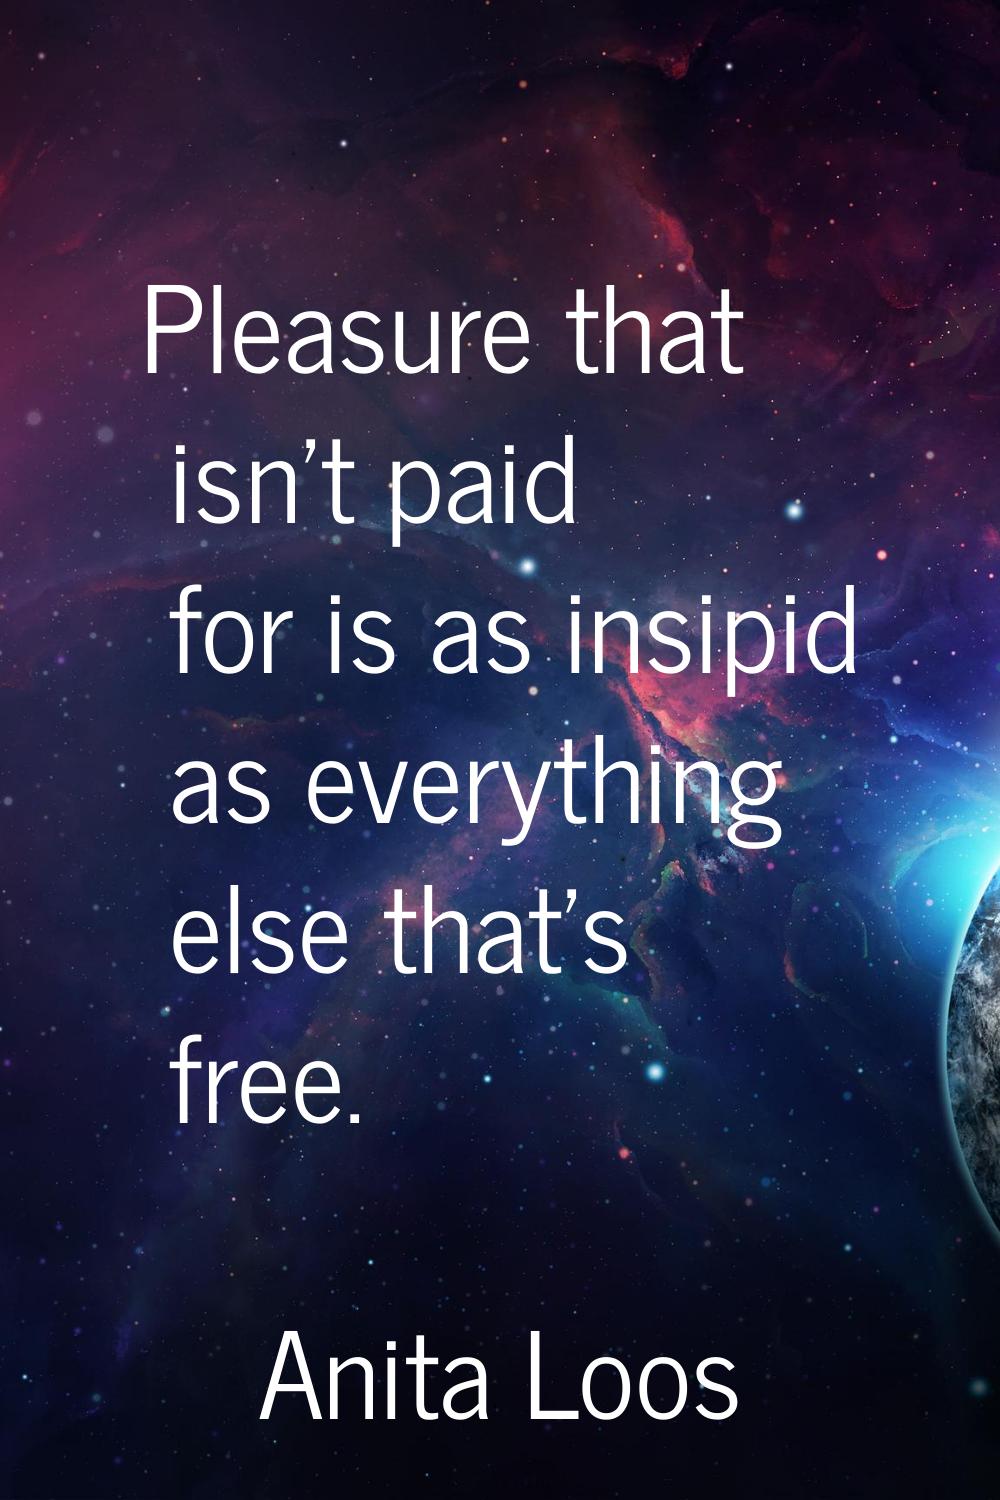 Pleasure that isn't paid for is as insipid as everything else that's free.